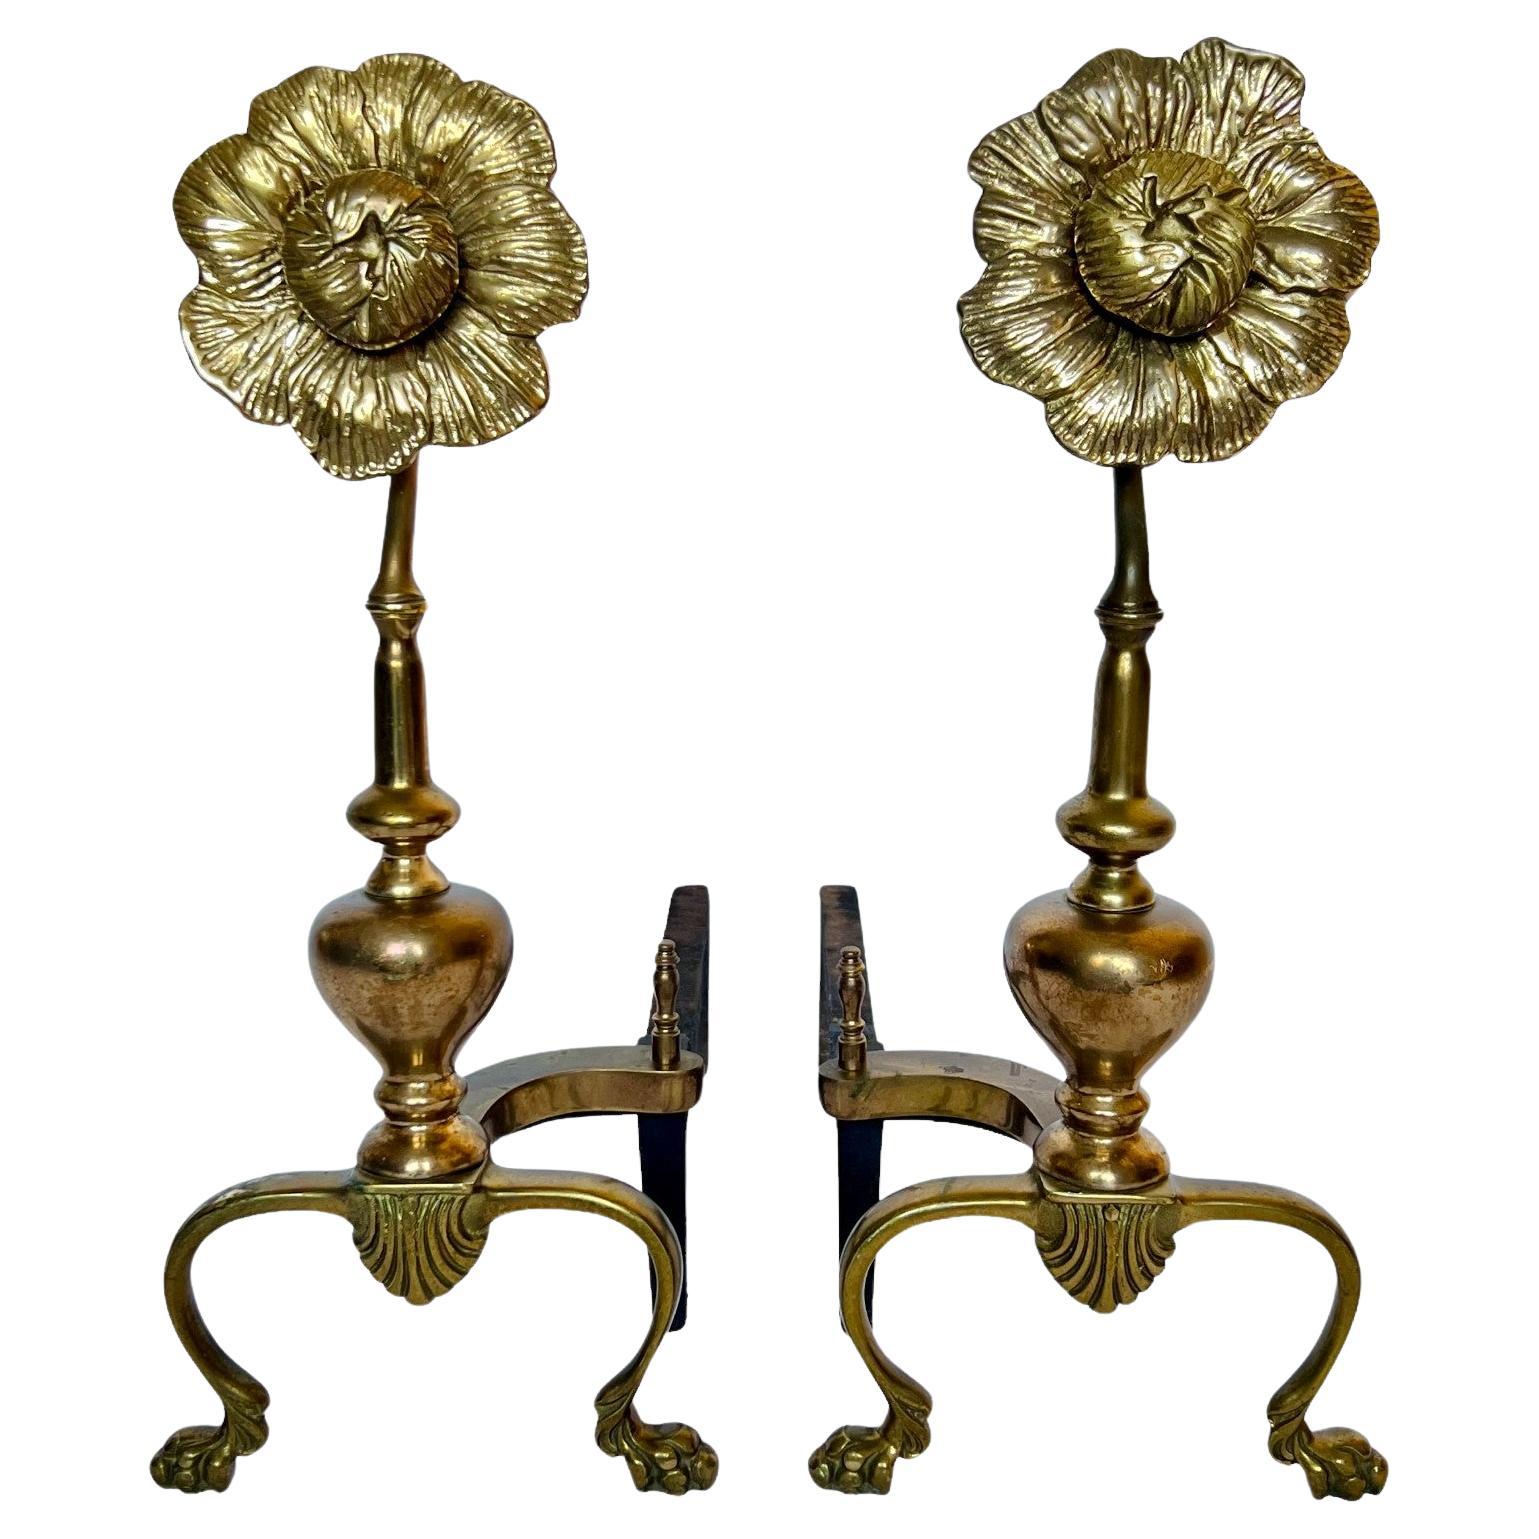 Mid 20th Century Brass Flower Andirons or Chenets, a Pair